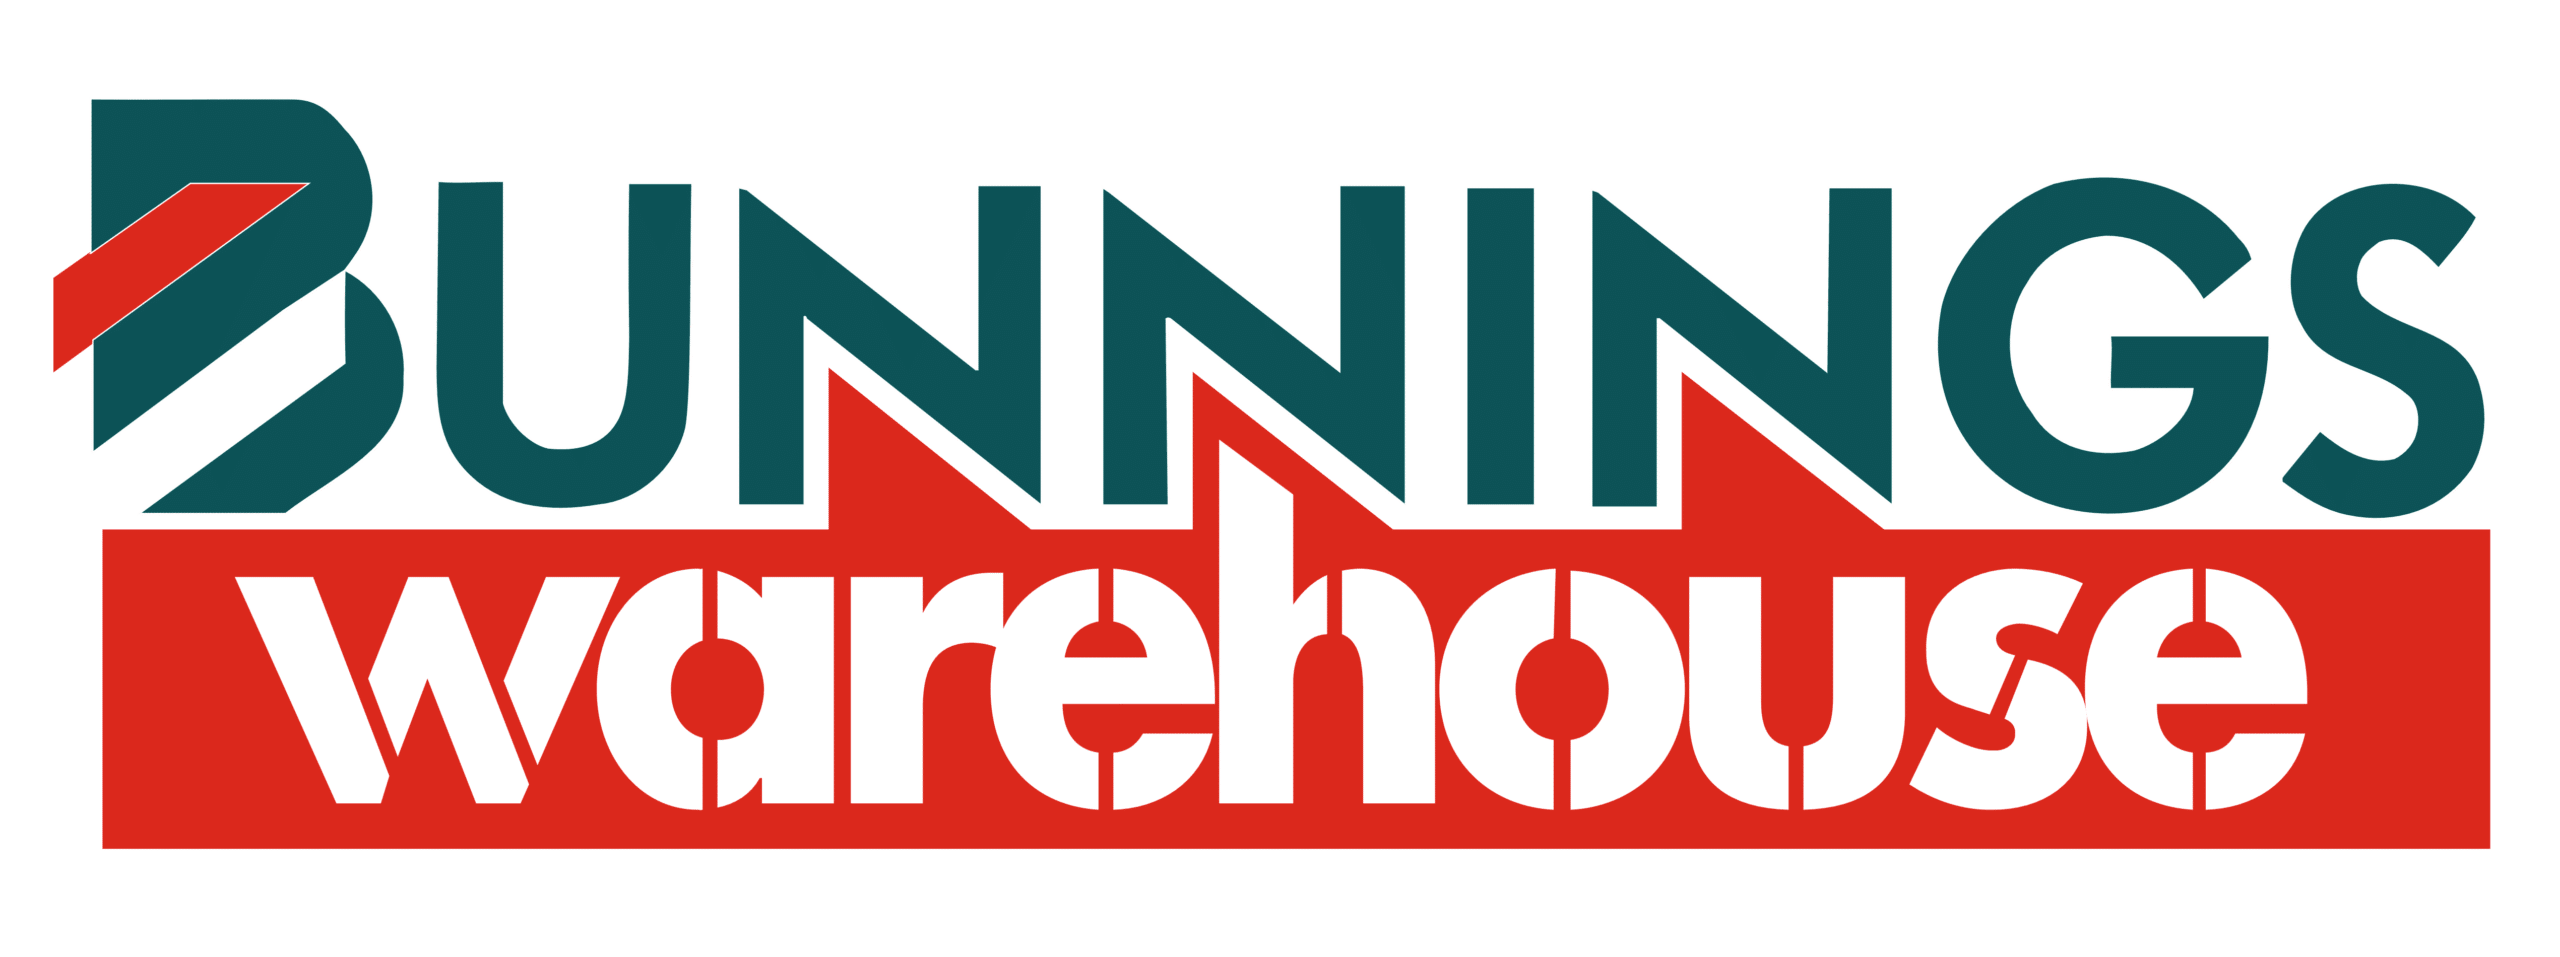 The image displays the Bunnings Warehouse logo, featuring the letter "B" enclosed in a red and green ribbon, with the word "BUNNINGS" below it in bold white letters, all against a vibrant red background. To the right, a smaller logo with the letter "N" in green and red colors is also visible.